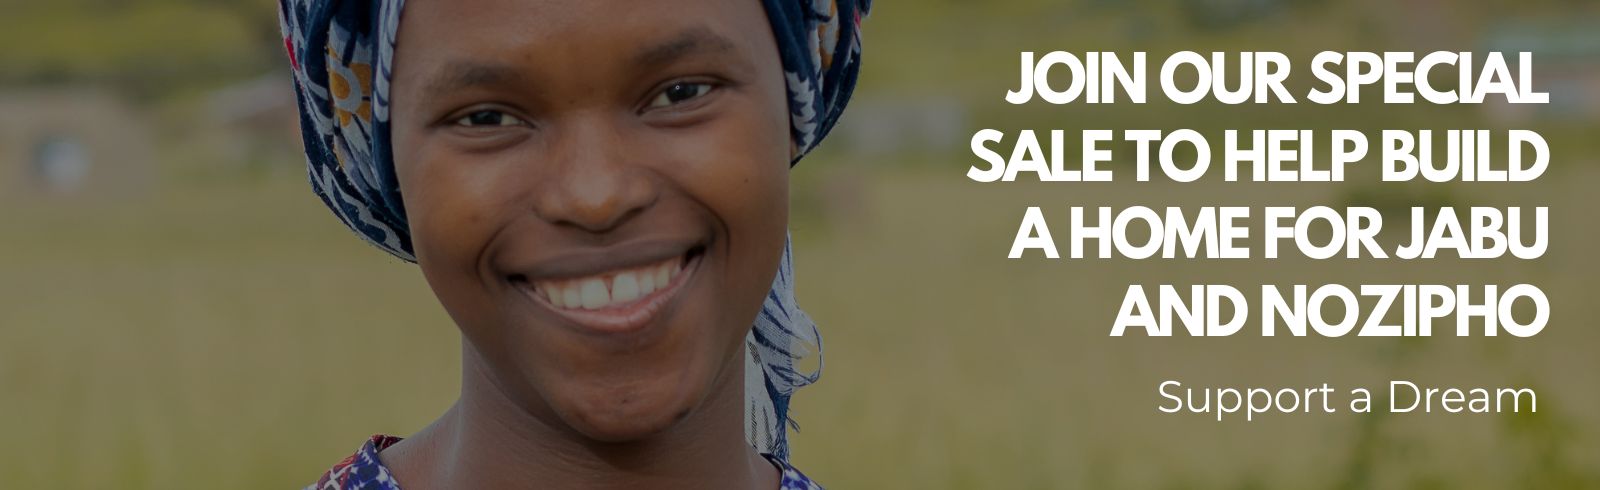 Join Our Special Sale to Help Build a Home for Jabu and Nozipho